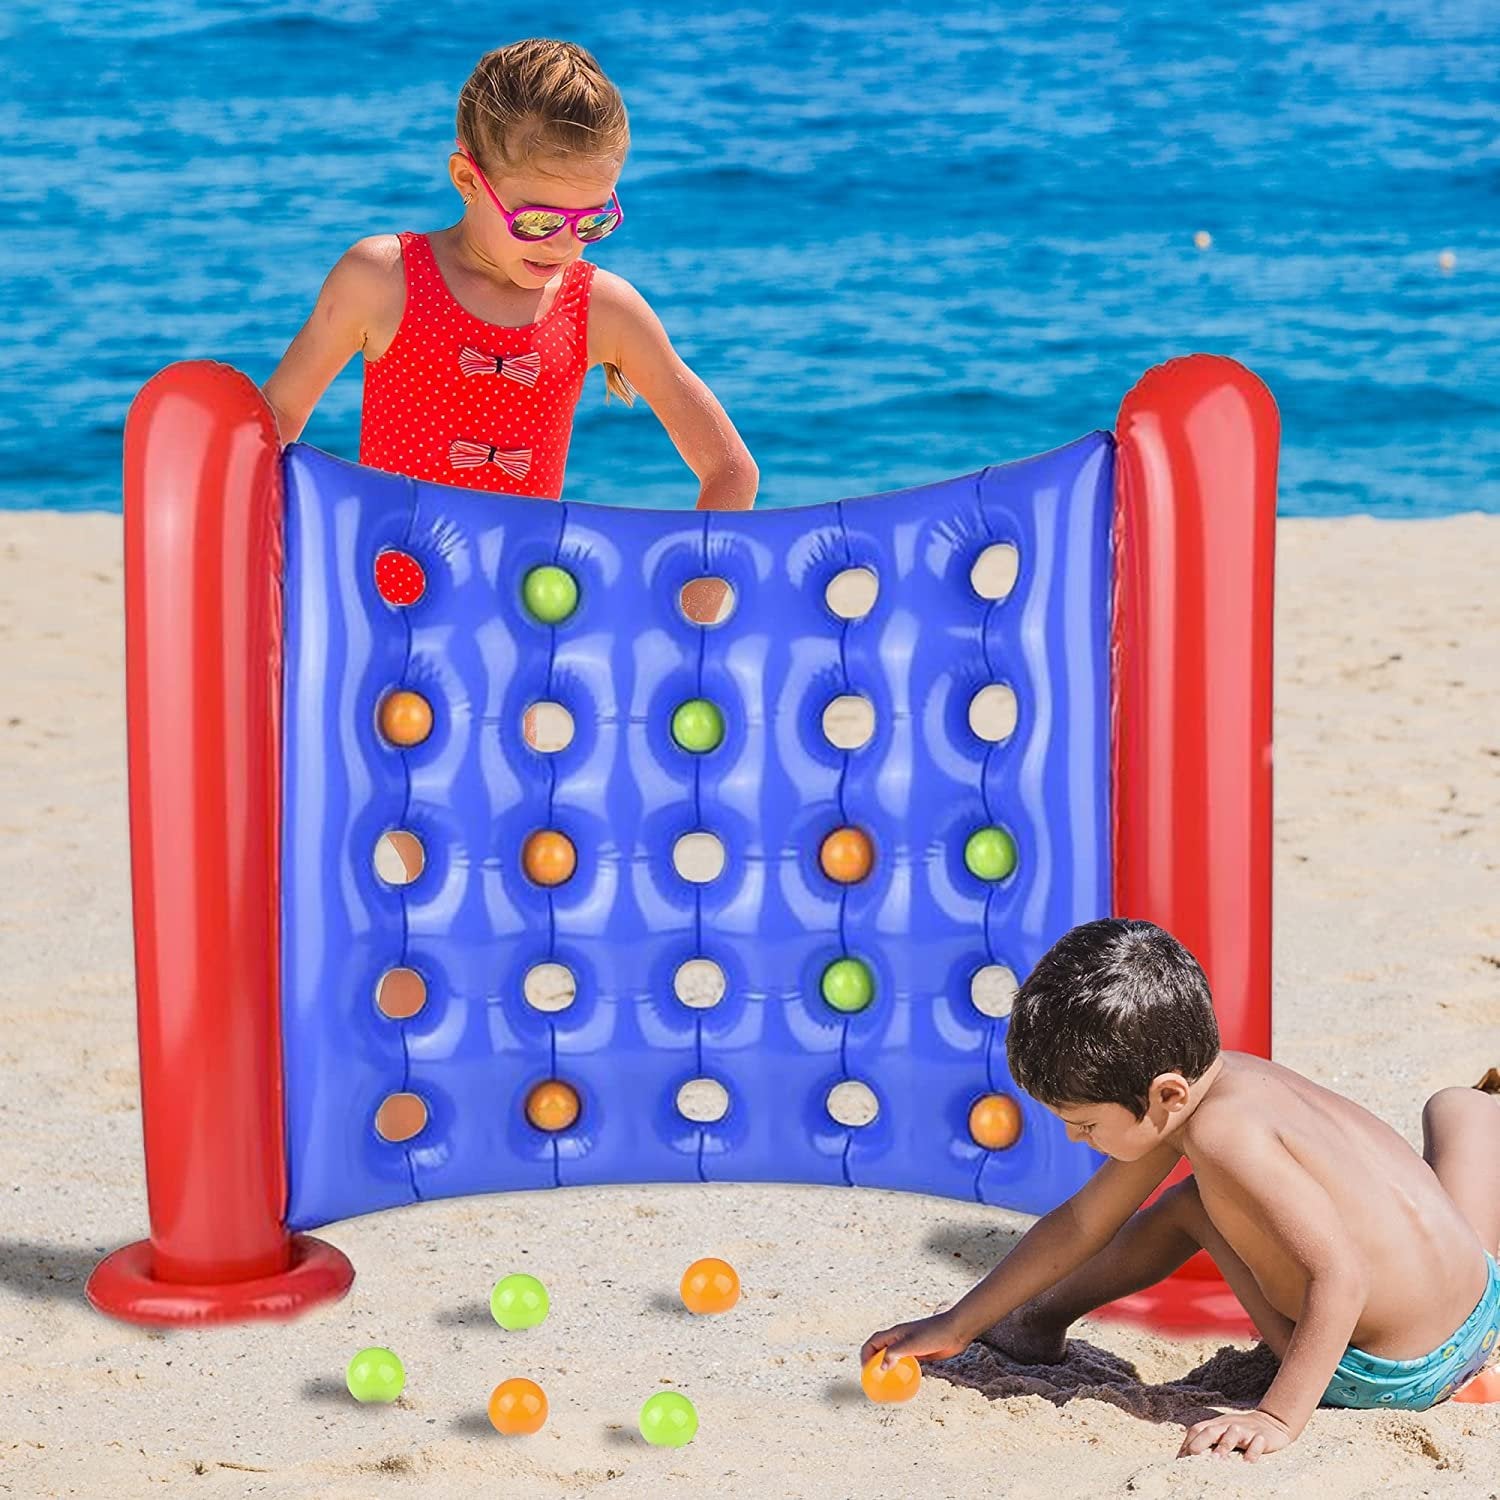 Giant Inflatable 4 in a Row Game - Inflatable Game Board with 24 Balls - Fun Party Activity for Kids and Outdoors - Gamer Birthday Decorations for Boys and Girls